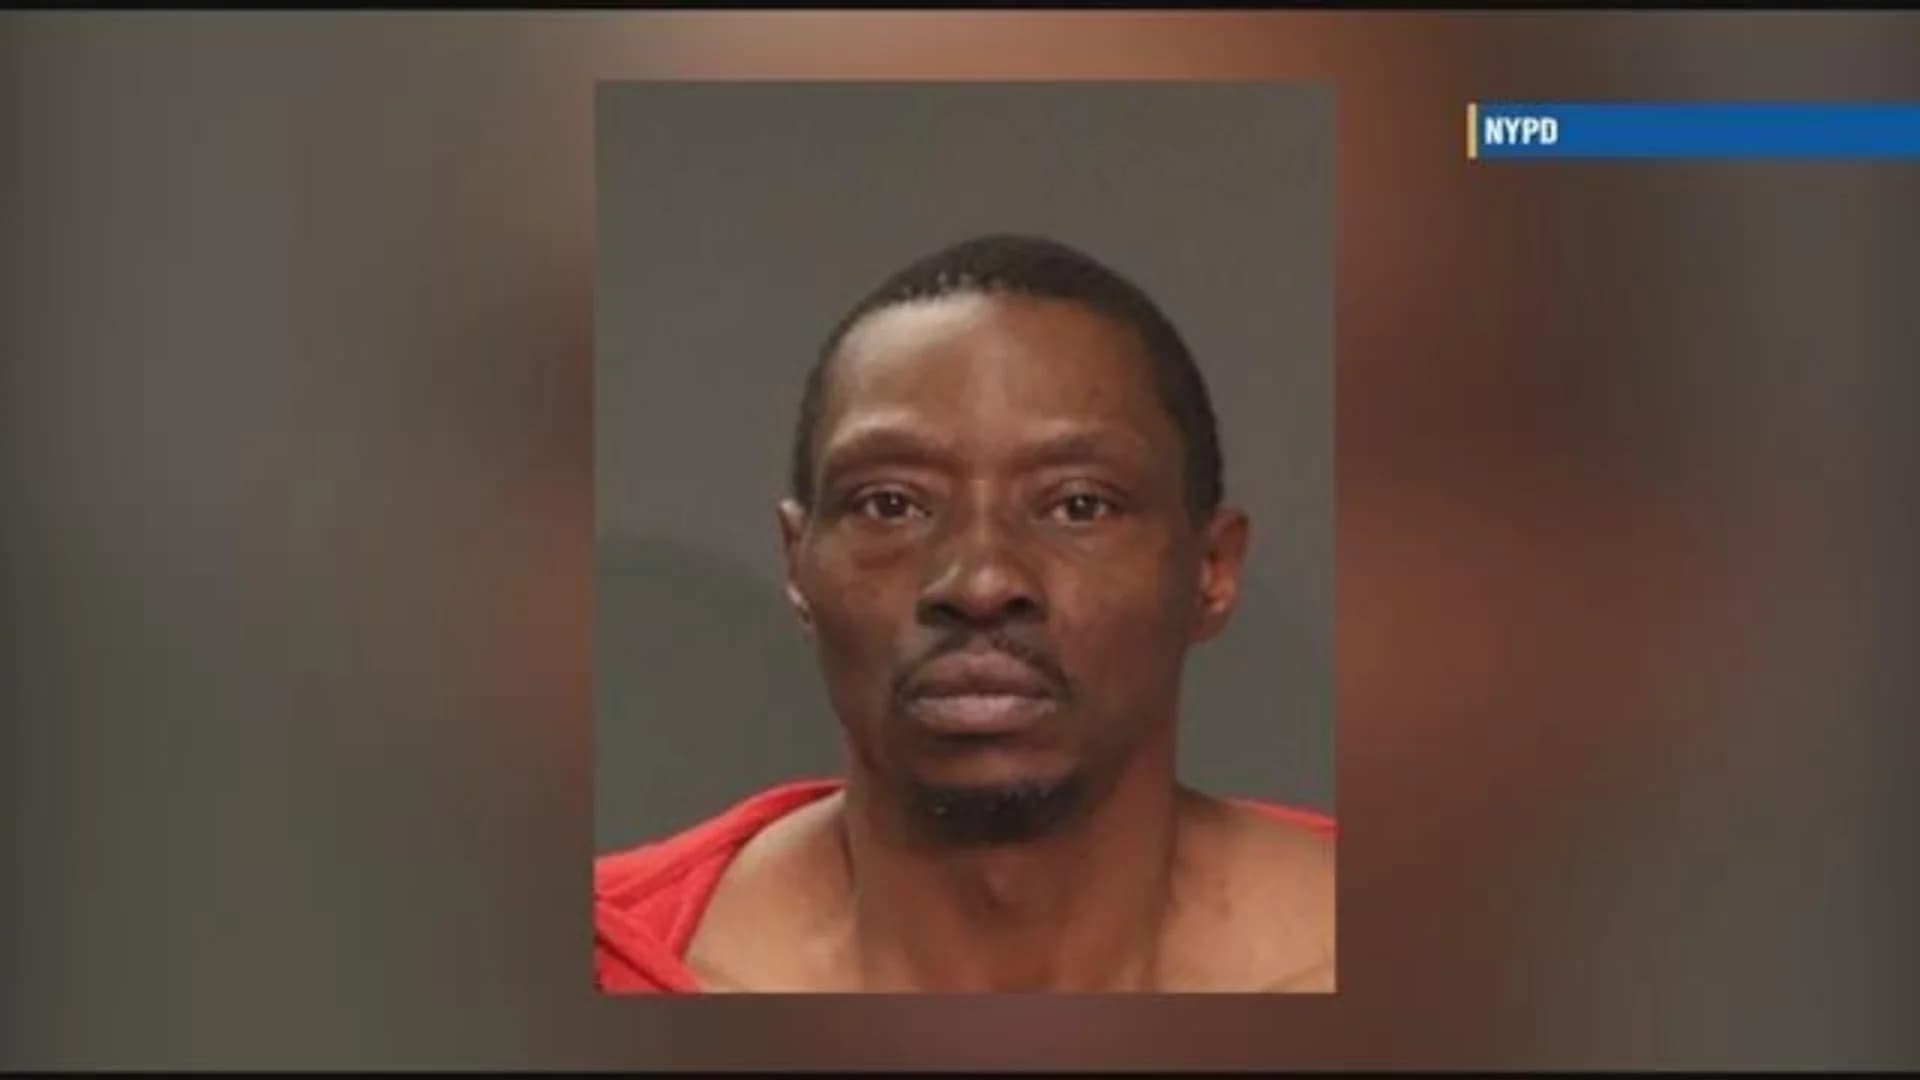 Police: Man who attempted to rape 83-year-old woman arrested